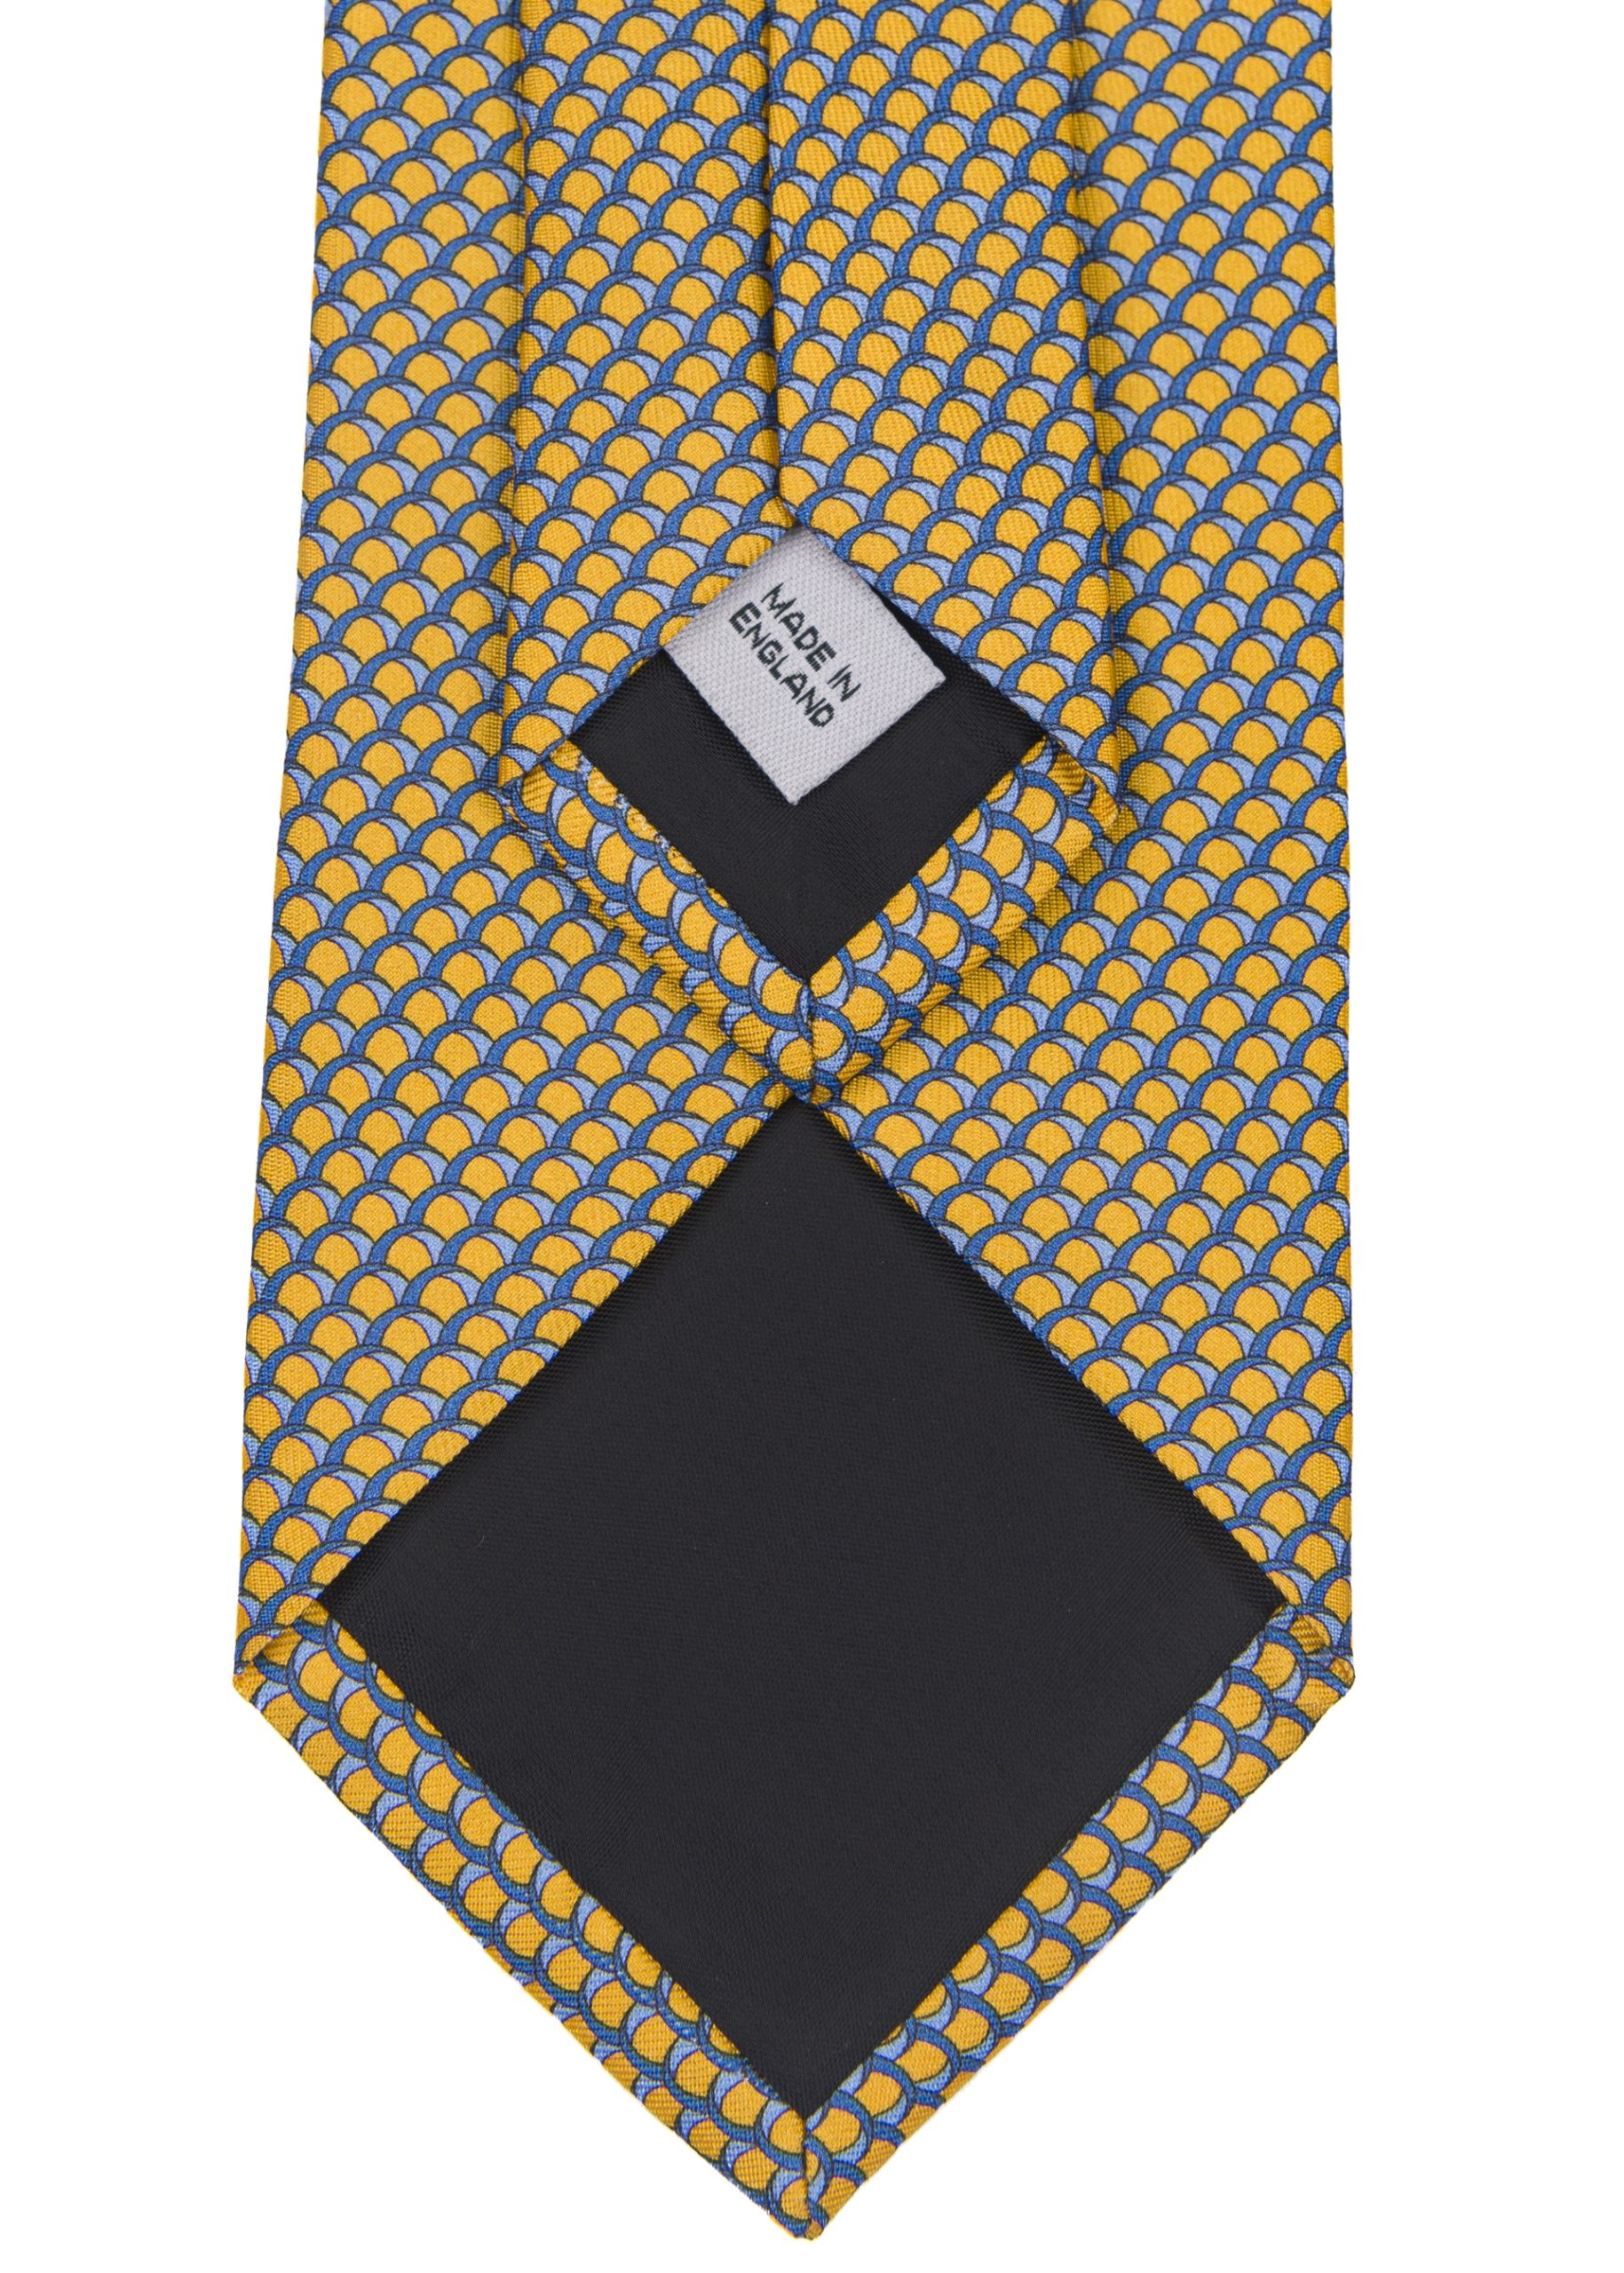 Men’s yellow and blue honeycomb tie by Roderick Charles London